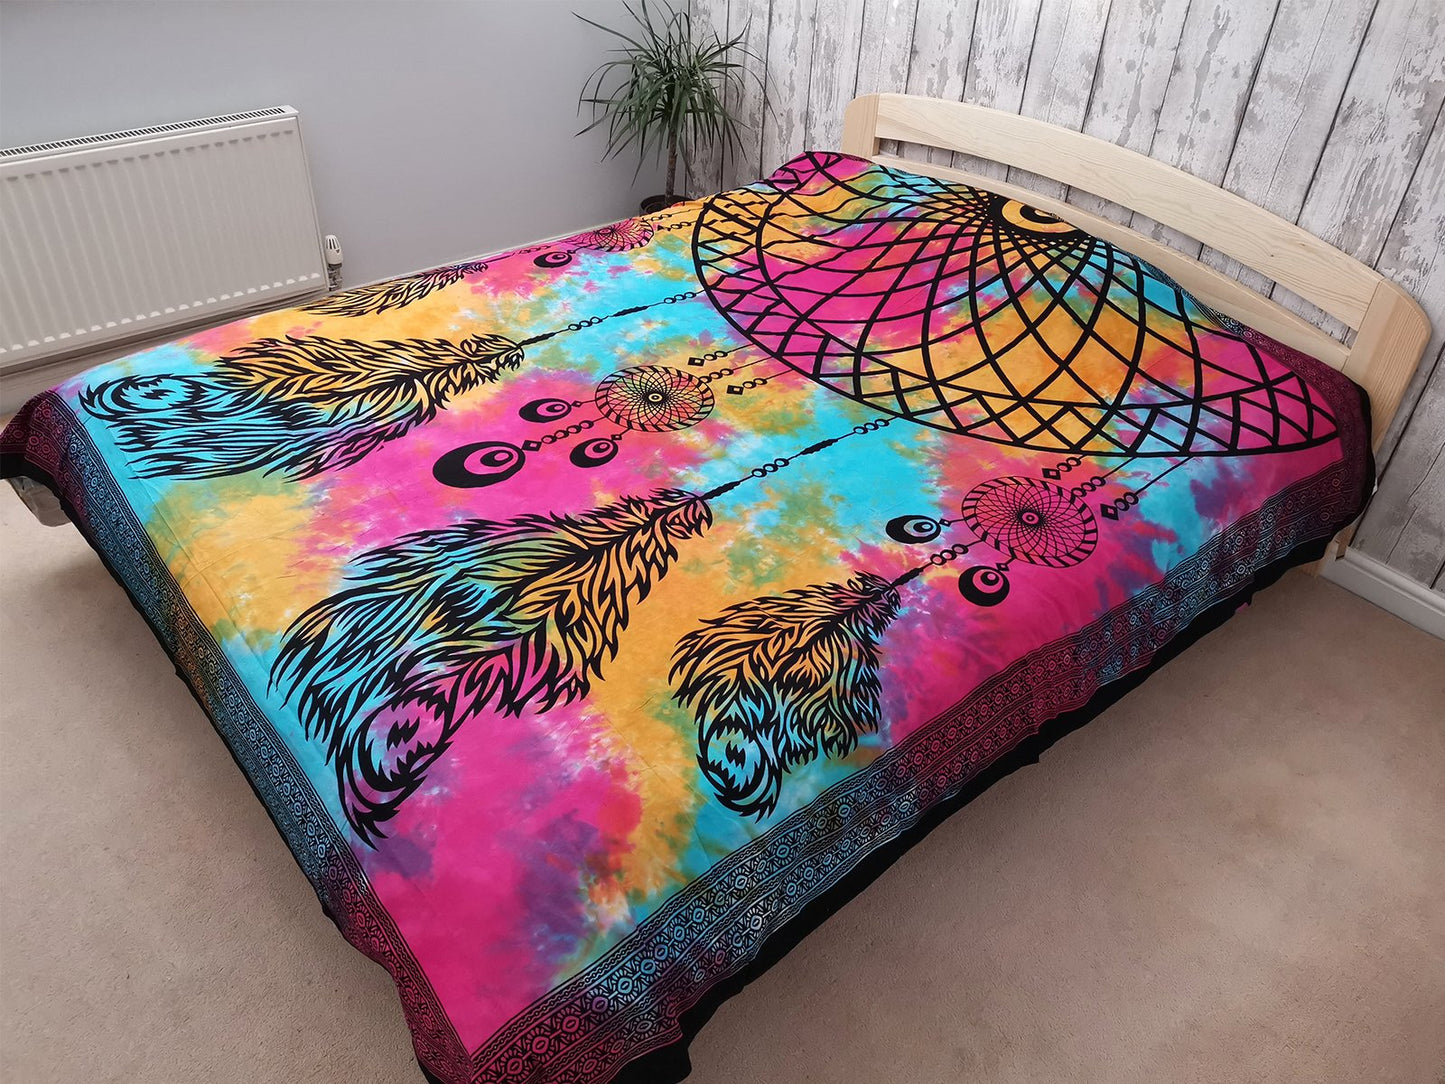 Cotton Bedspread and/or Wall Hanging - Dreamcatcher (Available in Single or Double)